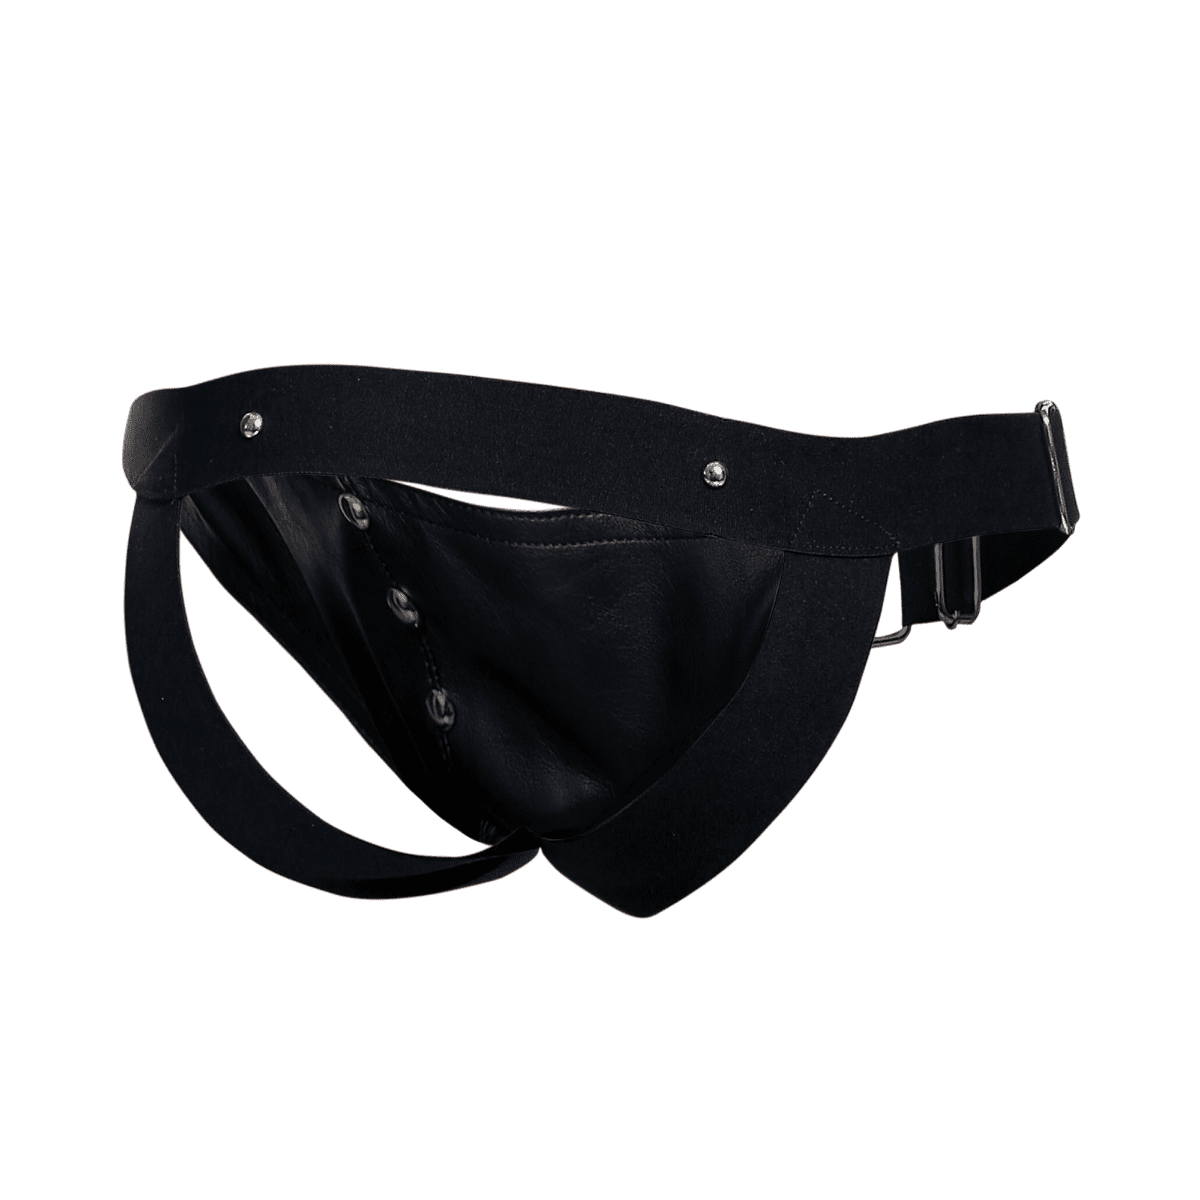 xBuy DNGEON Cockring Jockstrap by DNGEON for only 25.5 in Sexy